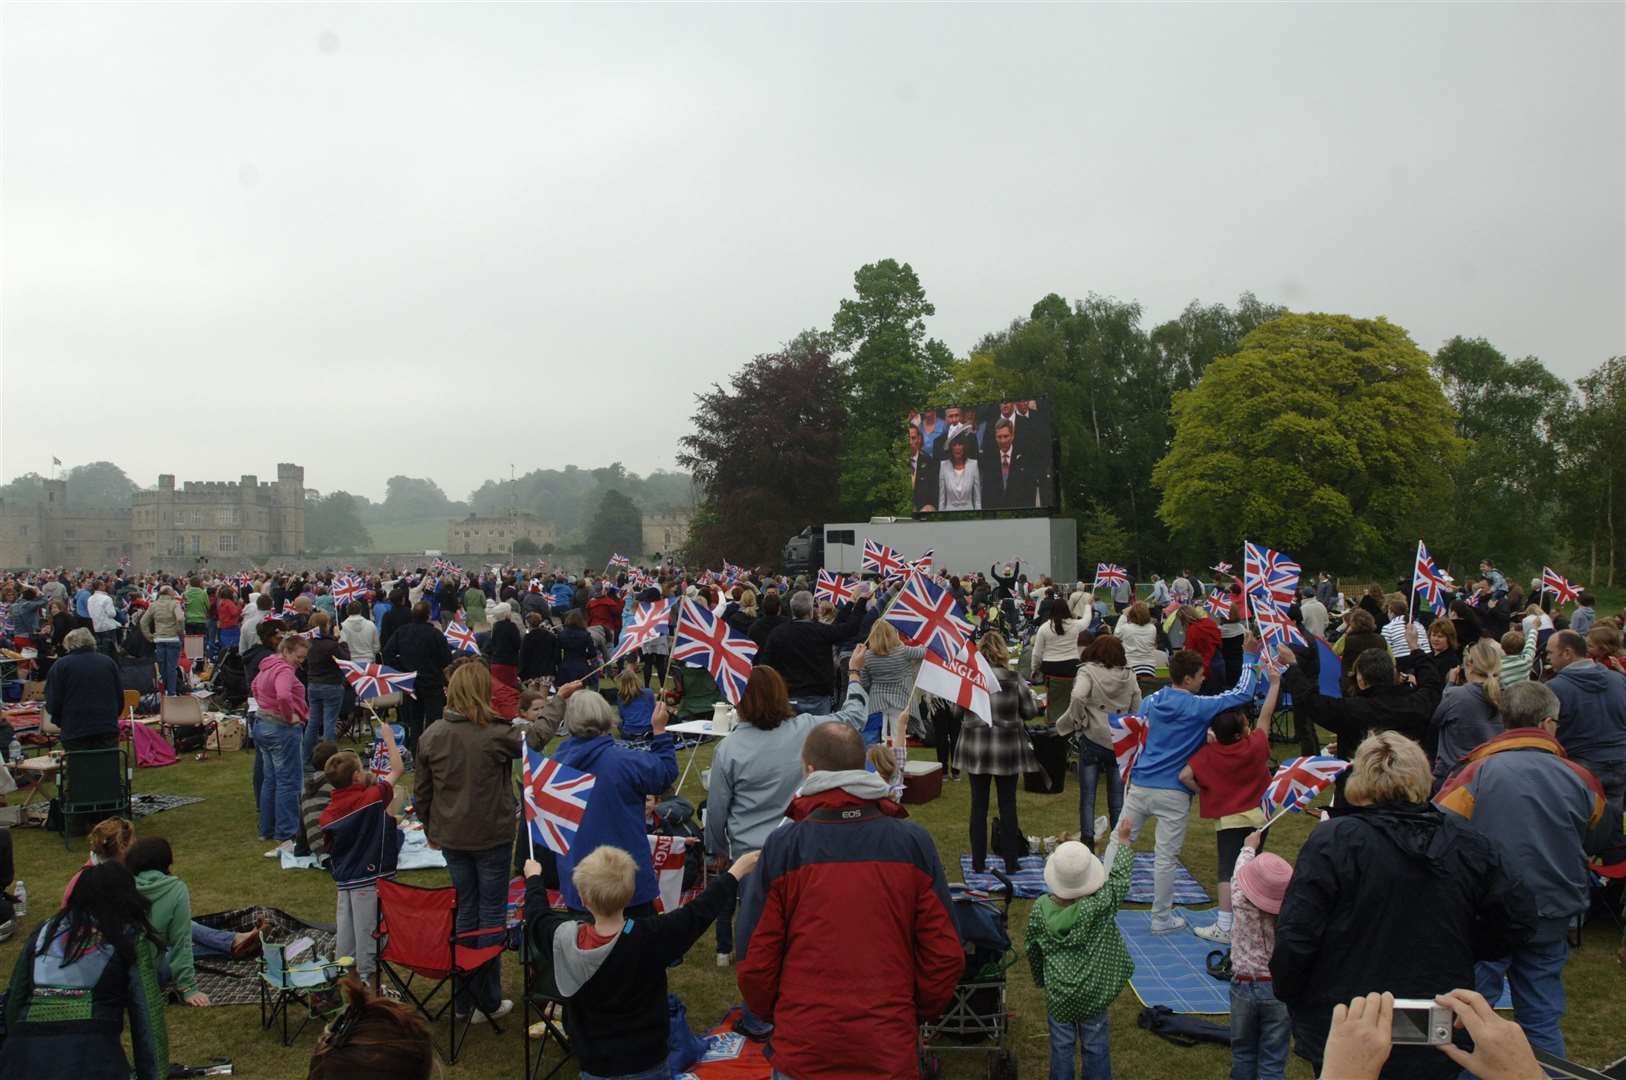 Visitors watched the wedding on the large screen at Leeds Castle. Picture: John Wardley